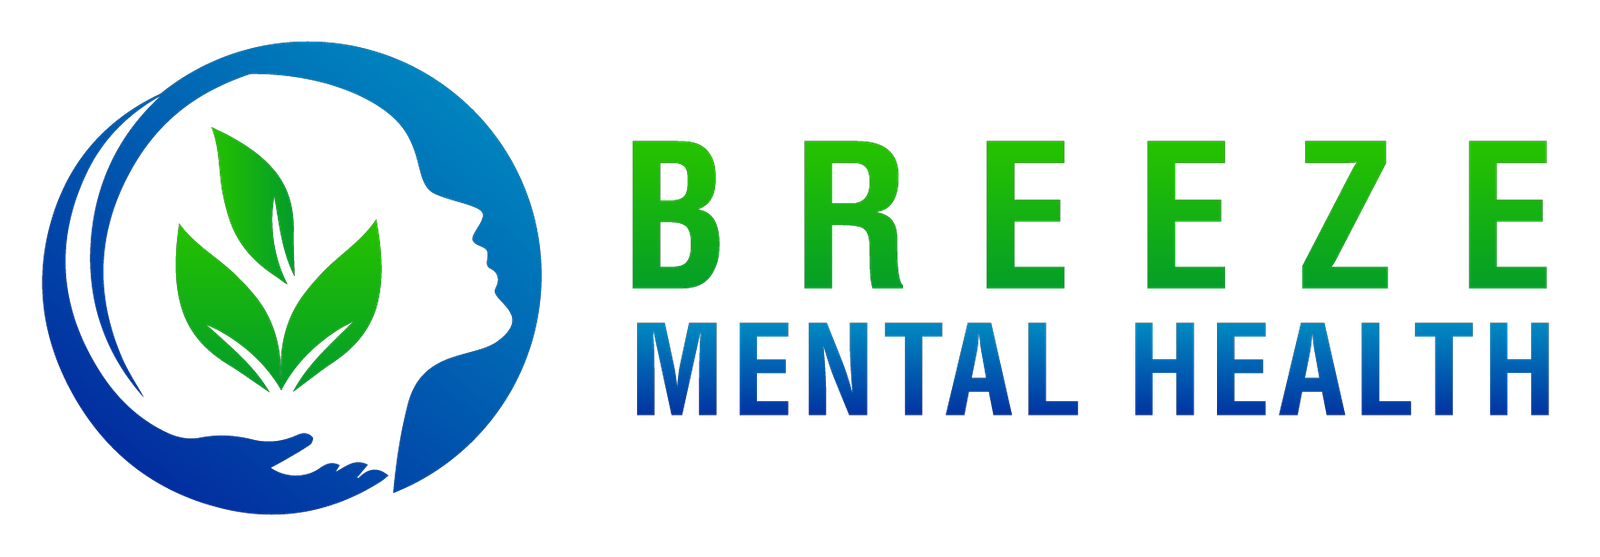 Breeze Mental Health offers adult outpatient psychiatry services in Ohio, Pennsylvania, Massachusetts and Washington.